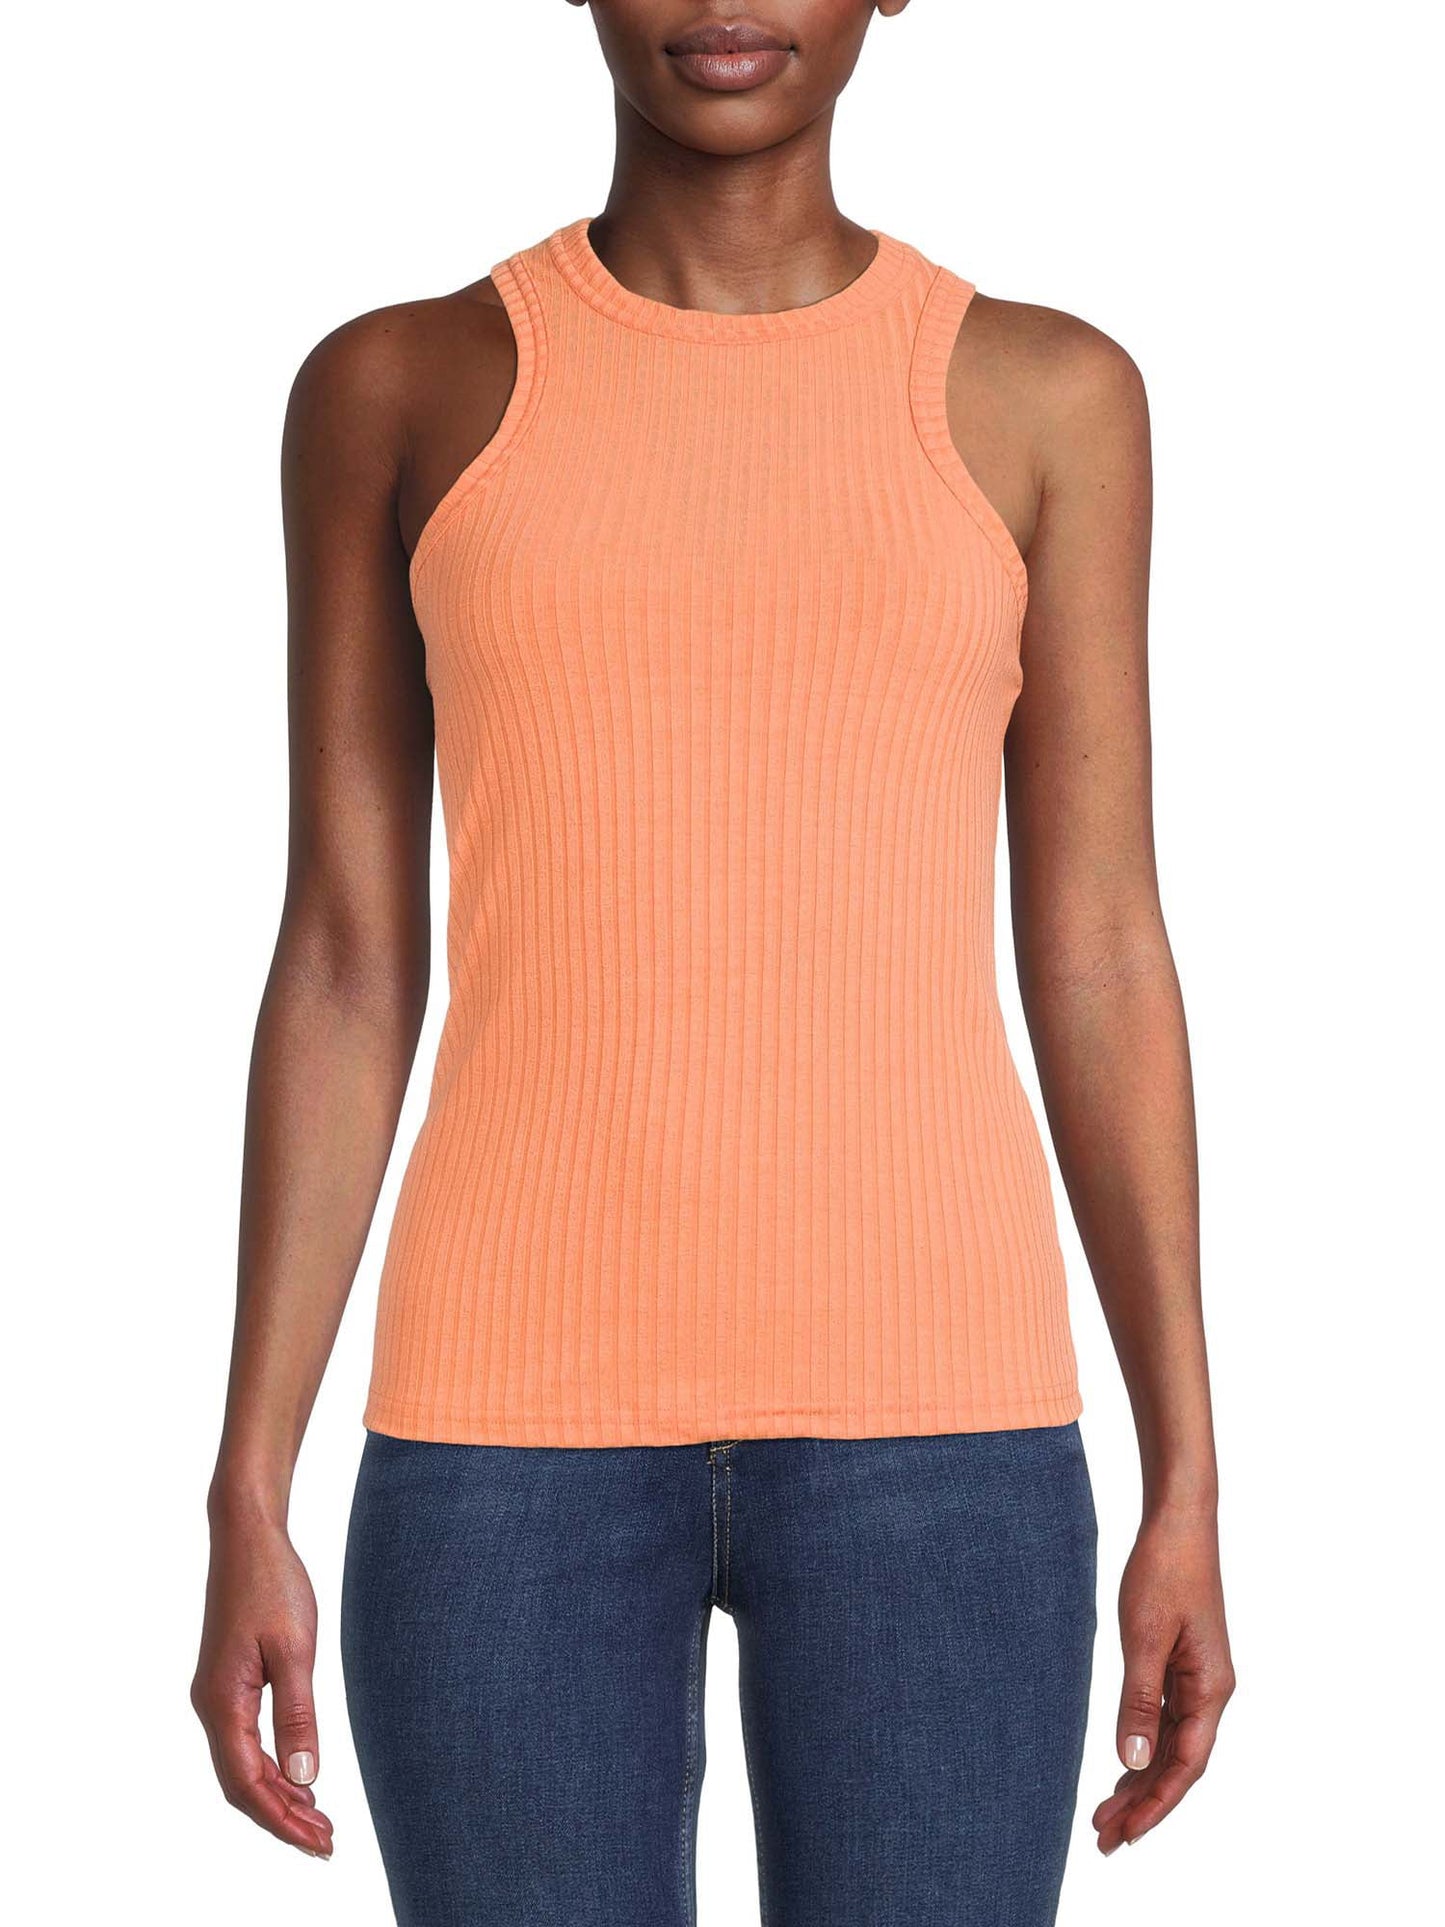 LA threads Active Women's Fitted Rib Racerback Tank Top